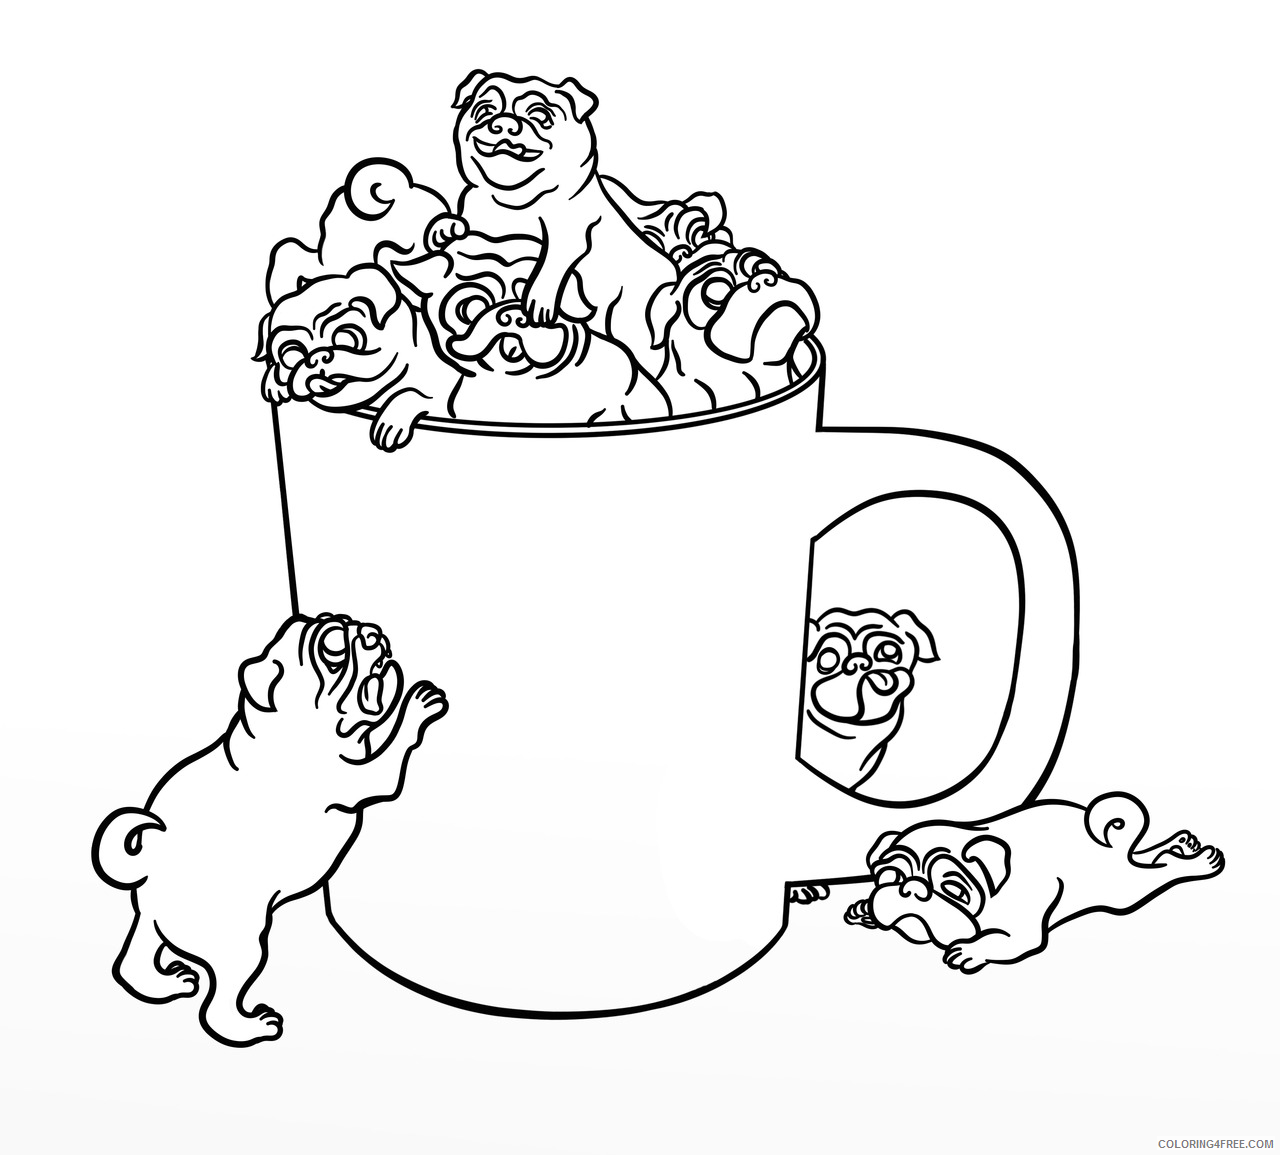 Pug Coloring Pages Animal Printable Sheets Cute Pug 2021 4045 Coloring4free